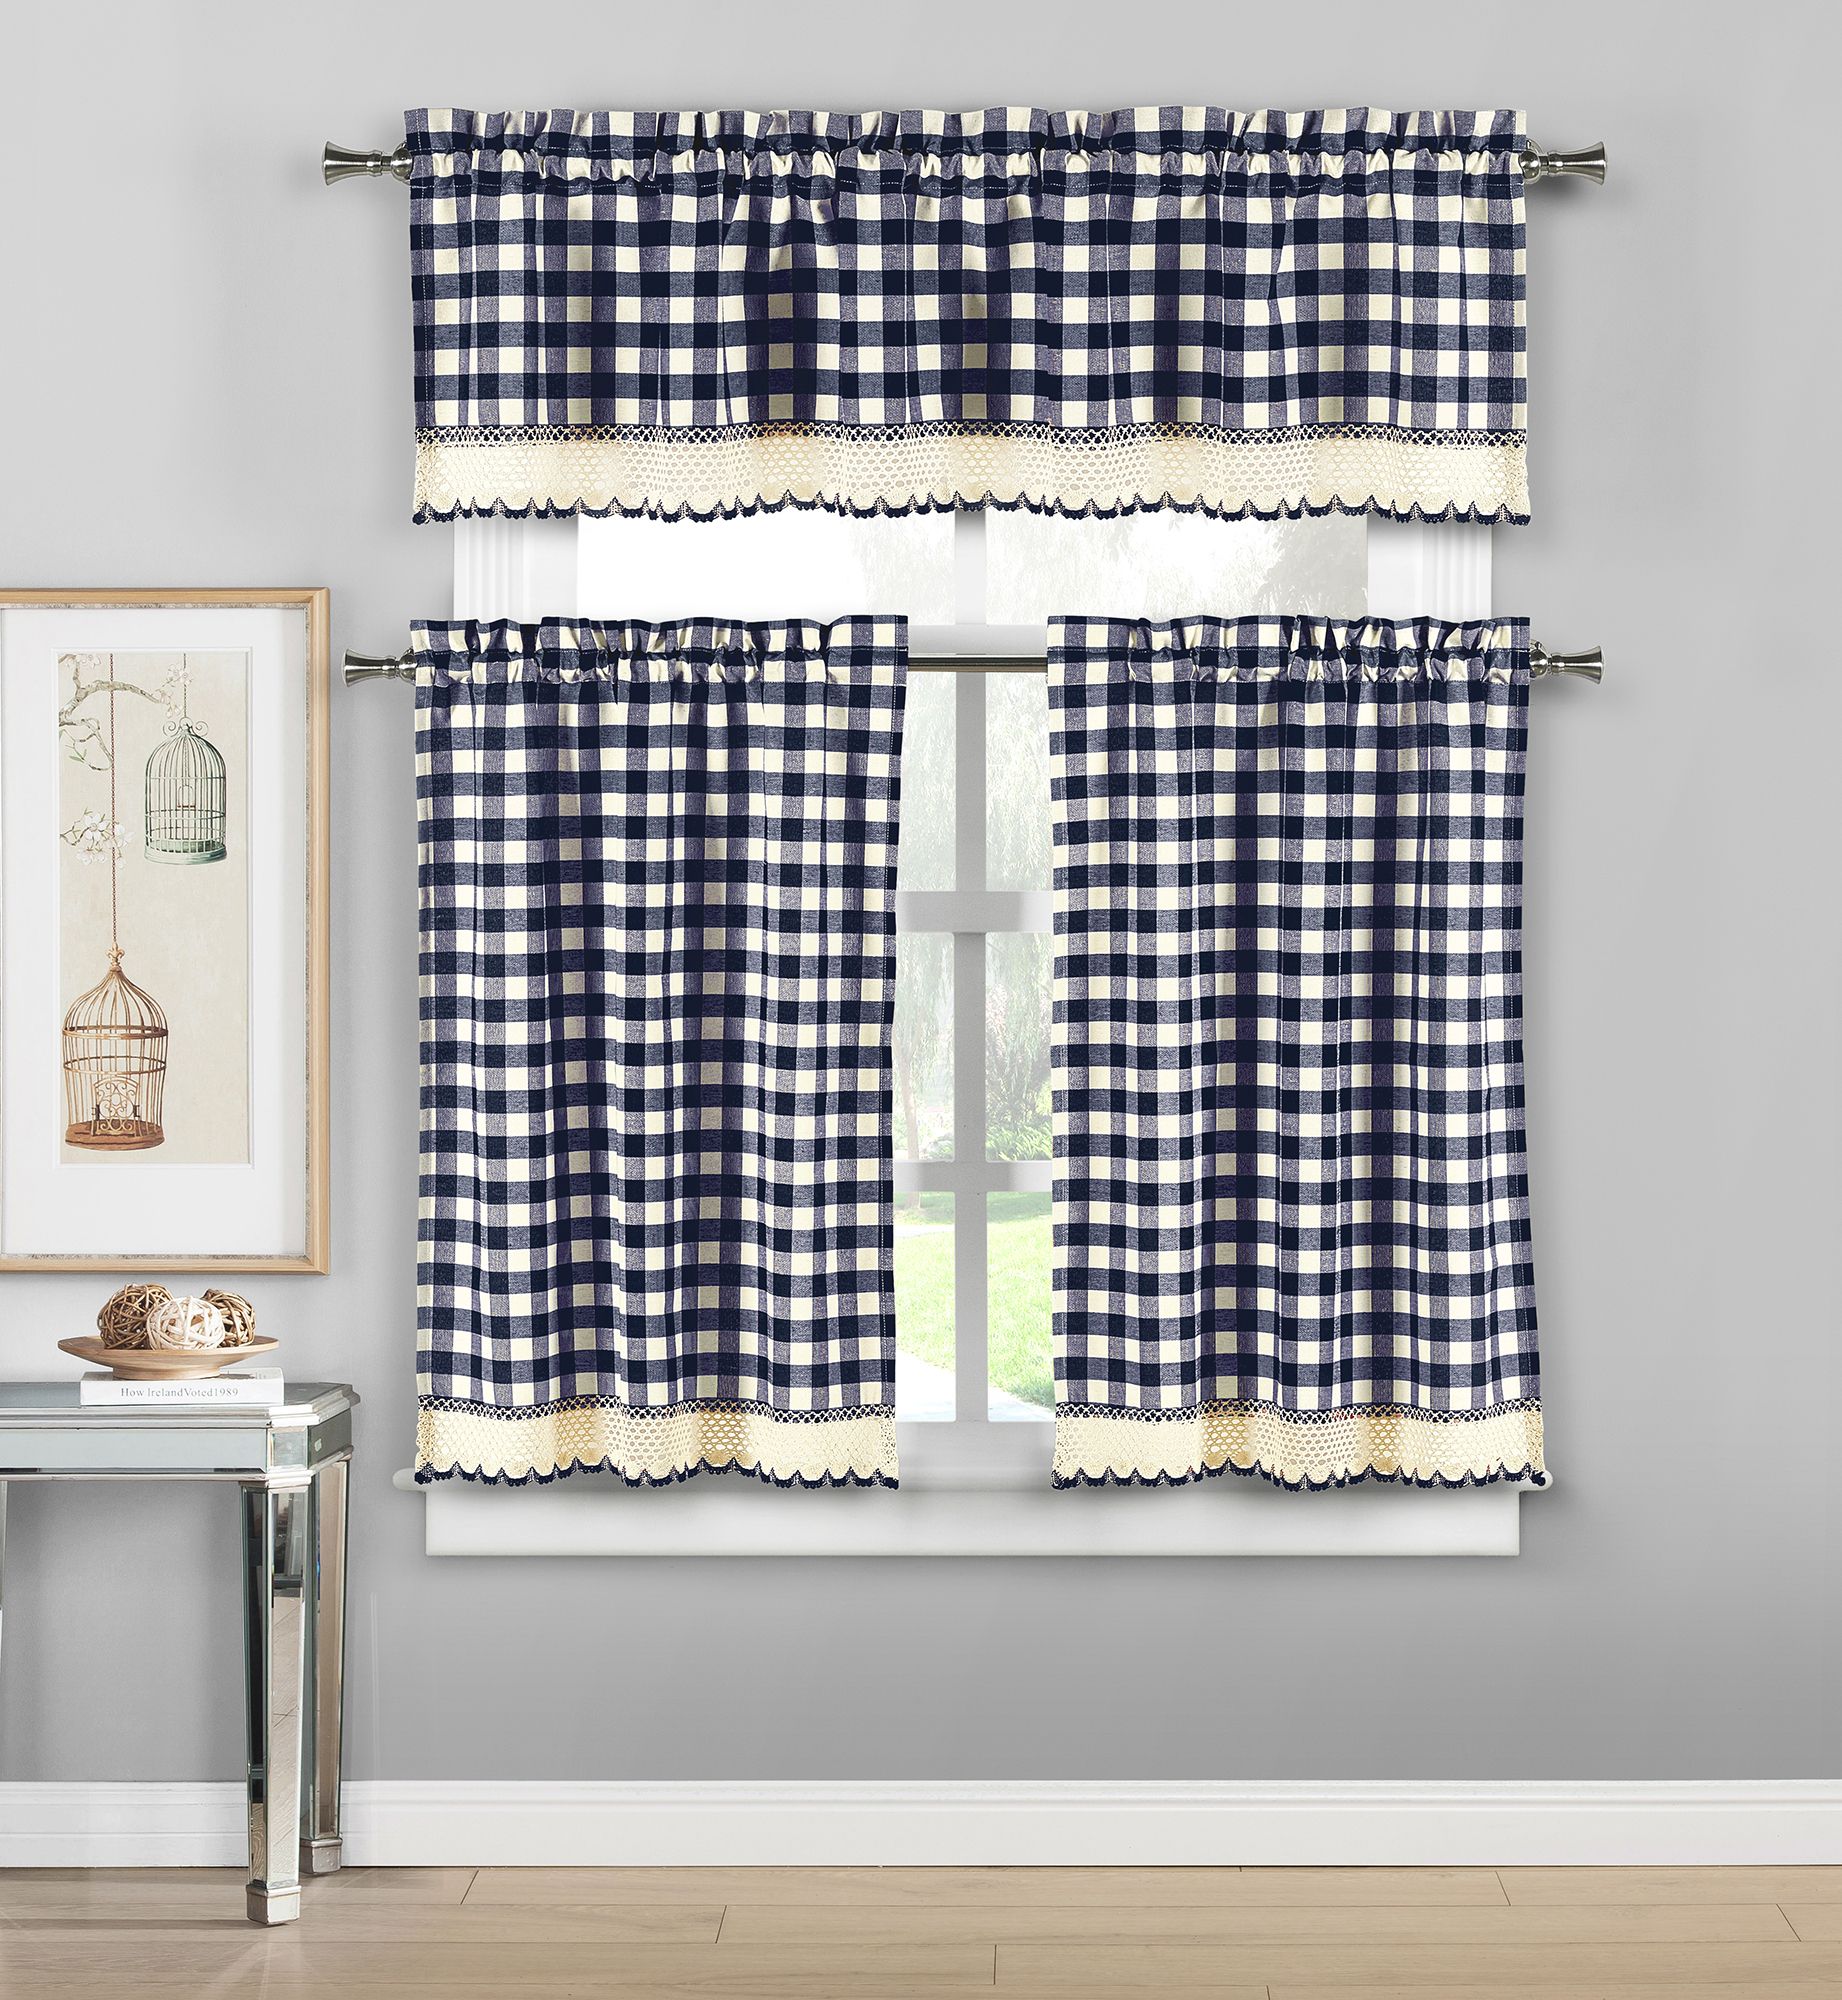 Details About Plaid Checkered Crochet Cotton Blend 3pc Window Curtain  Kitchen Tier & Valance With Lodge Plaid 3 Piece Kitchen Curtain Tier And Valance Sets (View 2 of 20)